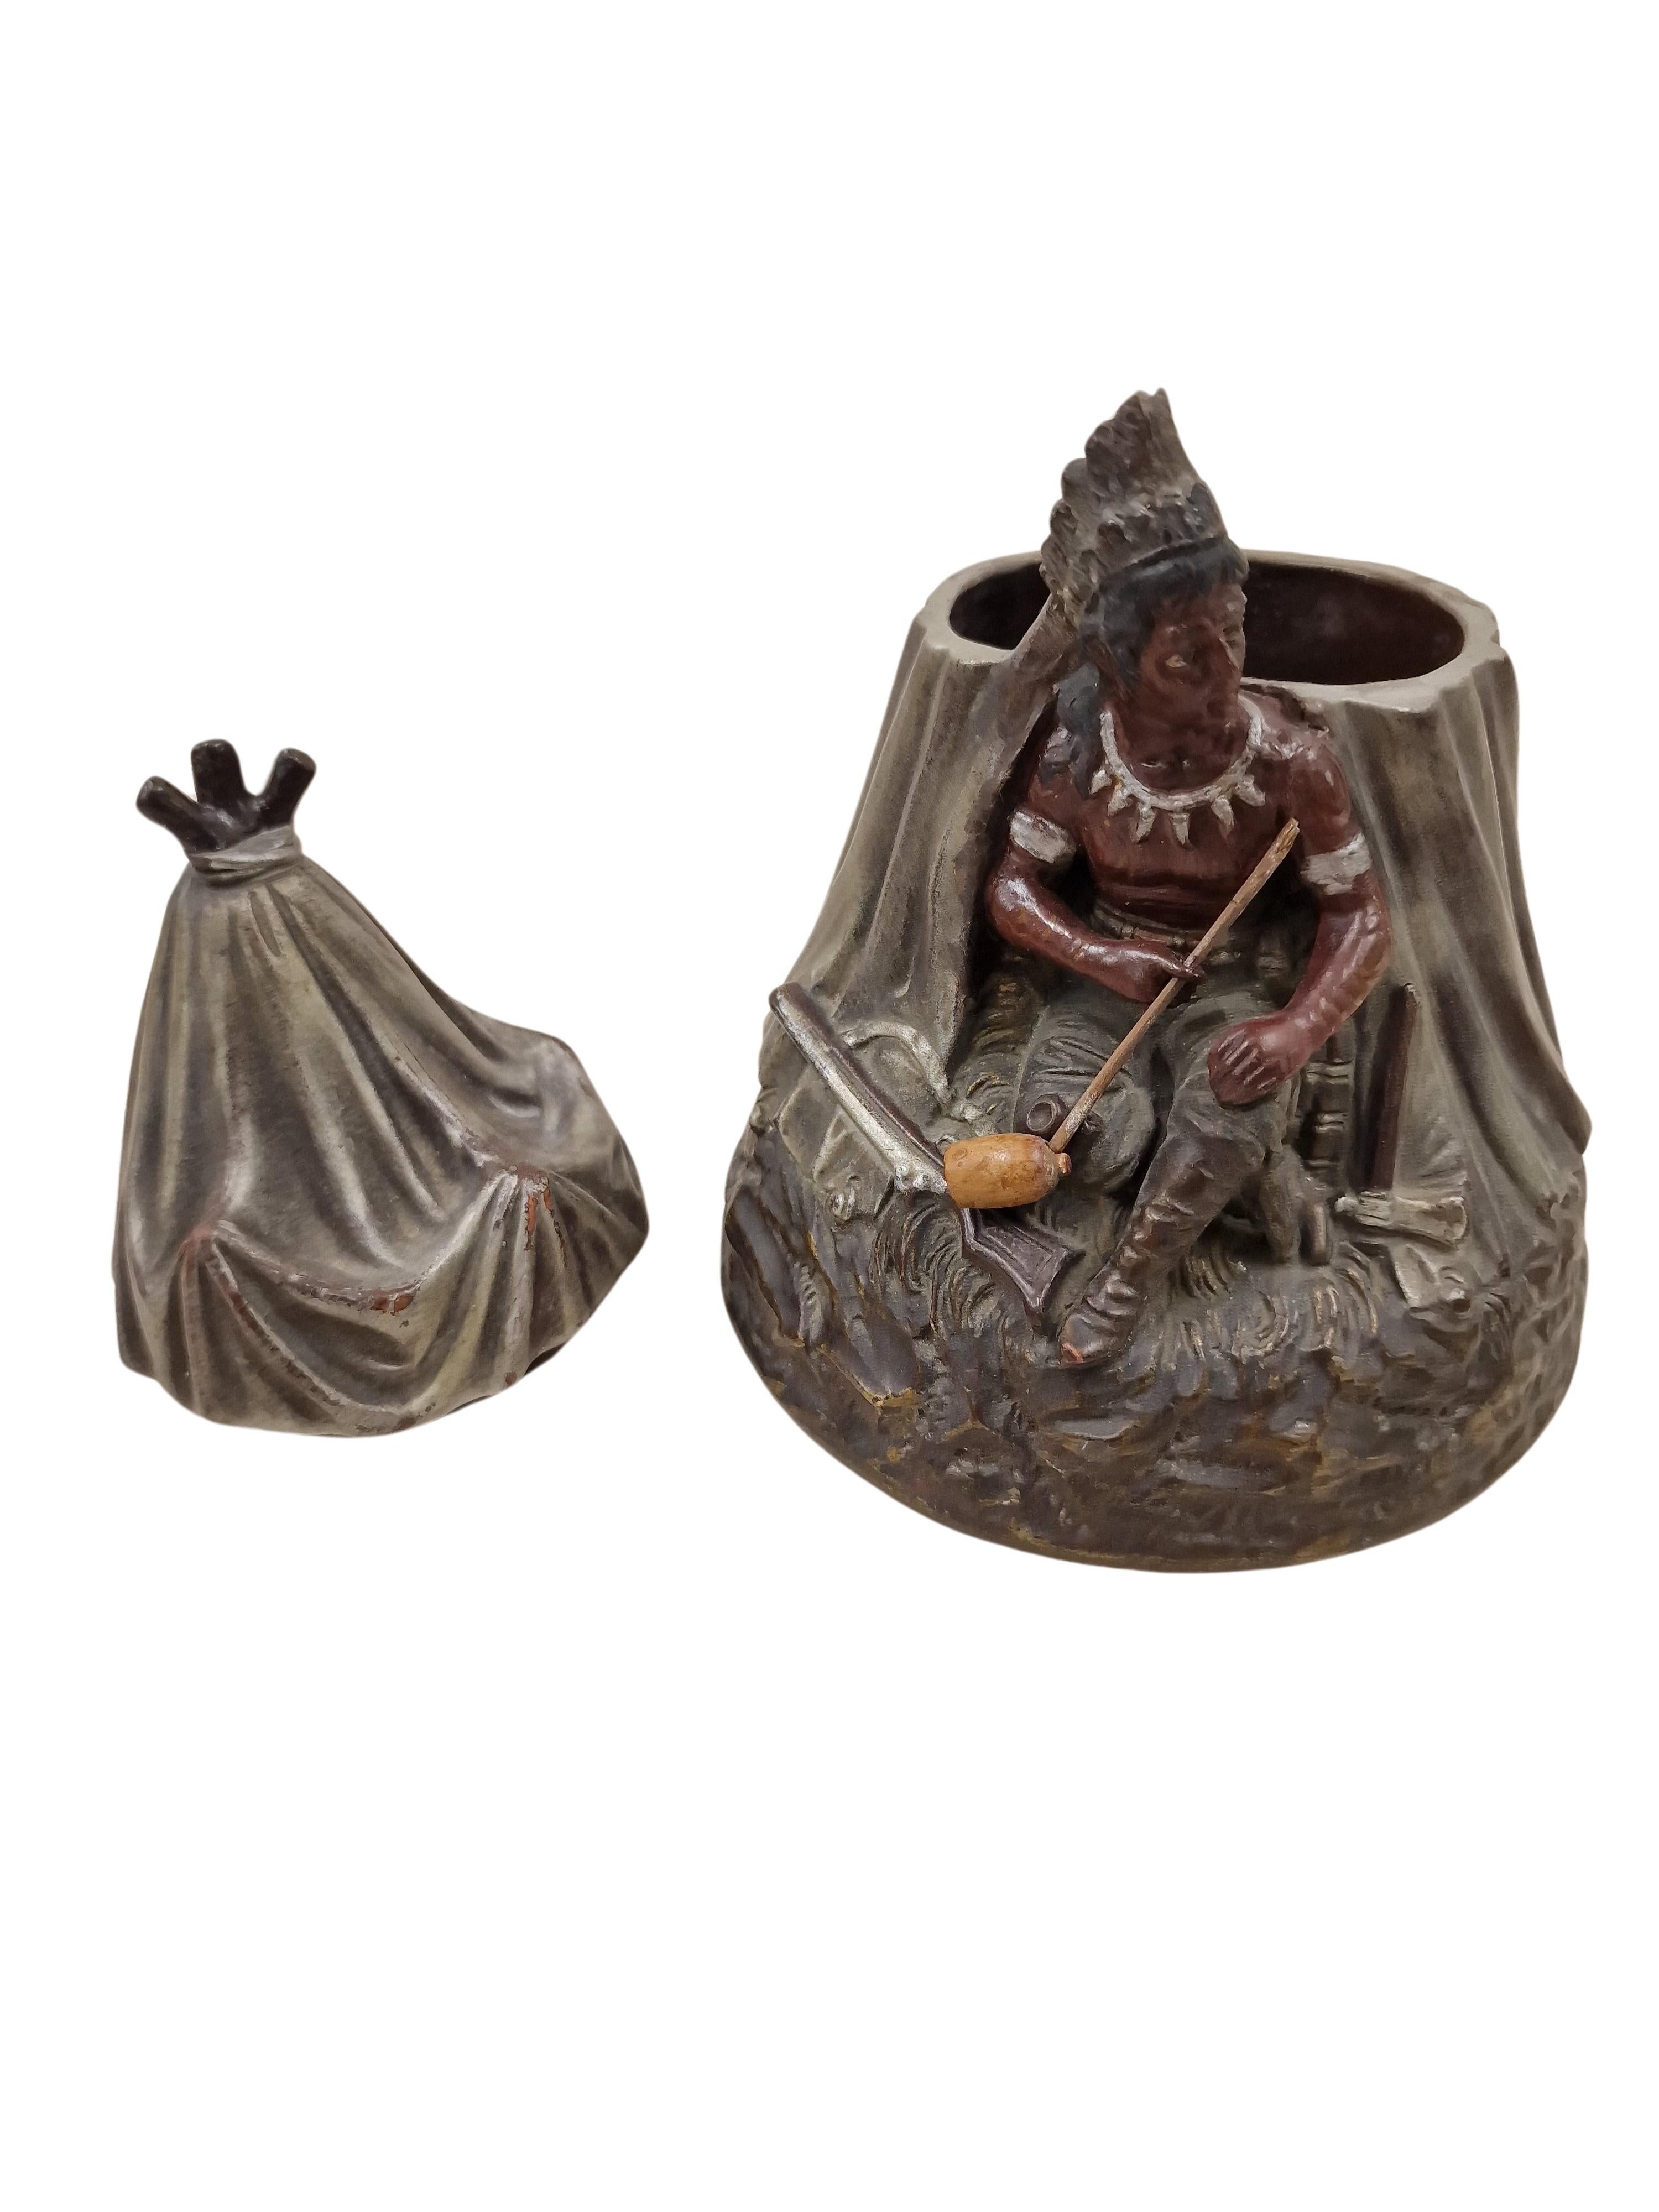 Early, very rare tobacco box with a very unusual scene from the famous ceramic Manufactory in Utrecht in the Netherlands, made around 1890. 

This depiction is extraordinary - a native American sits in front of his tent and smokes a peace pipe